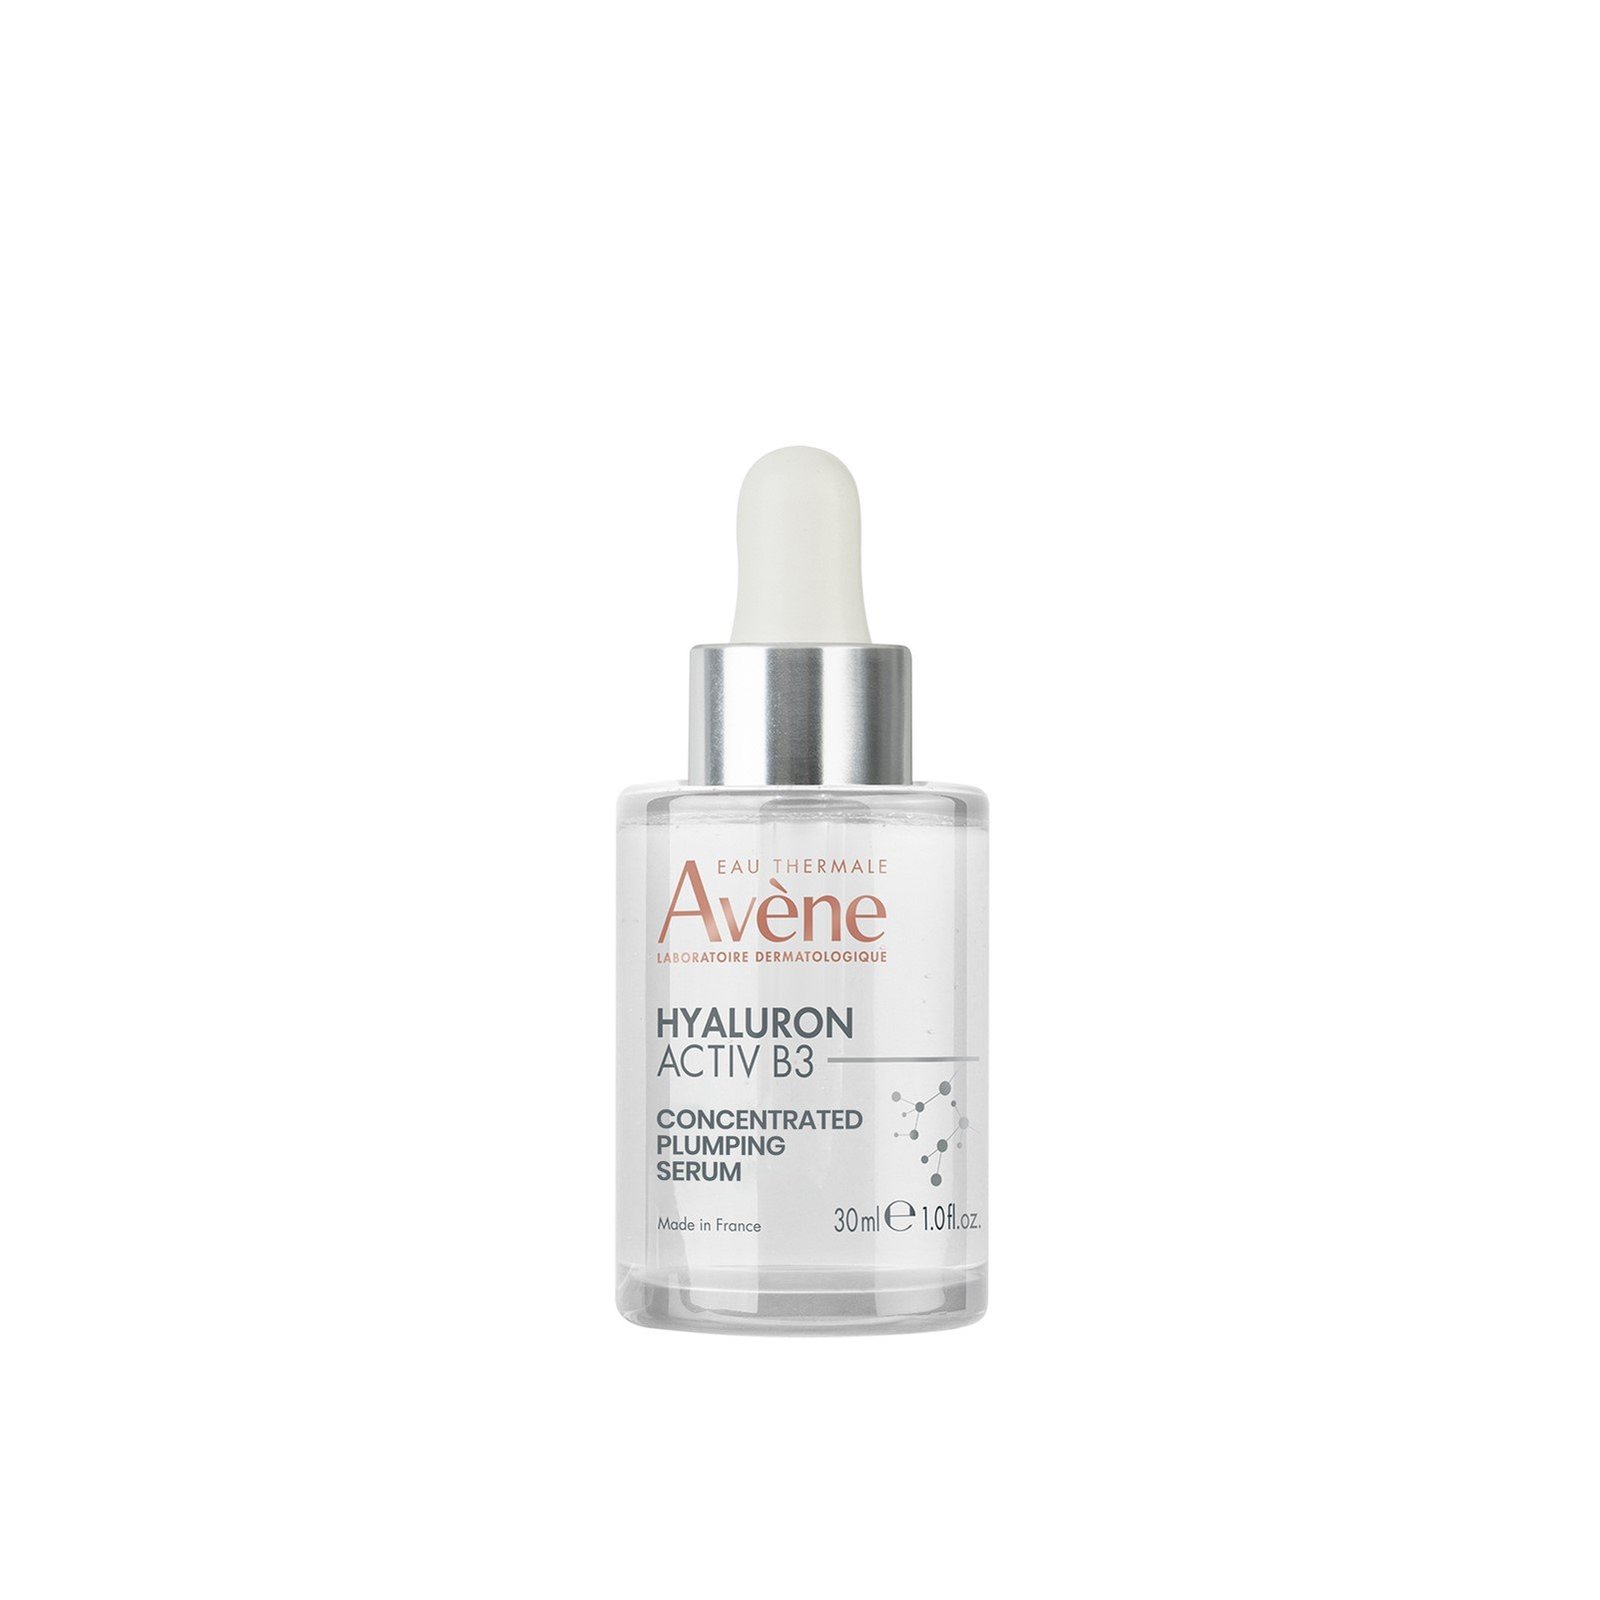 Avène Hyaluron Activ B3 Concentrated Plumping Serum 30ml (1.0floz)